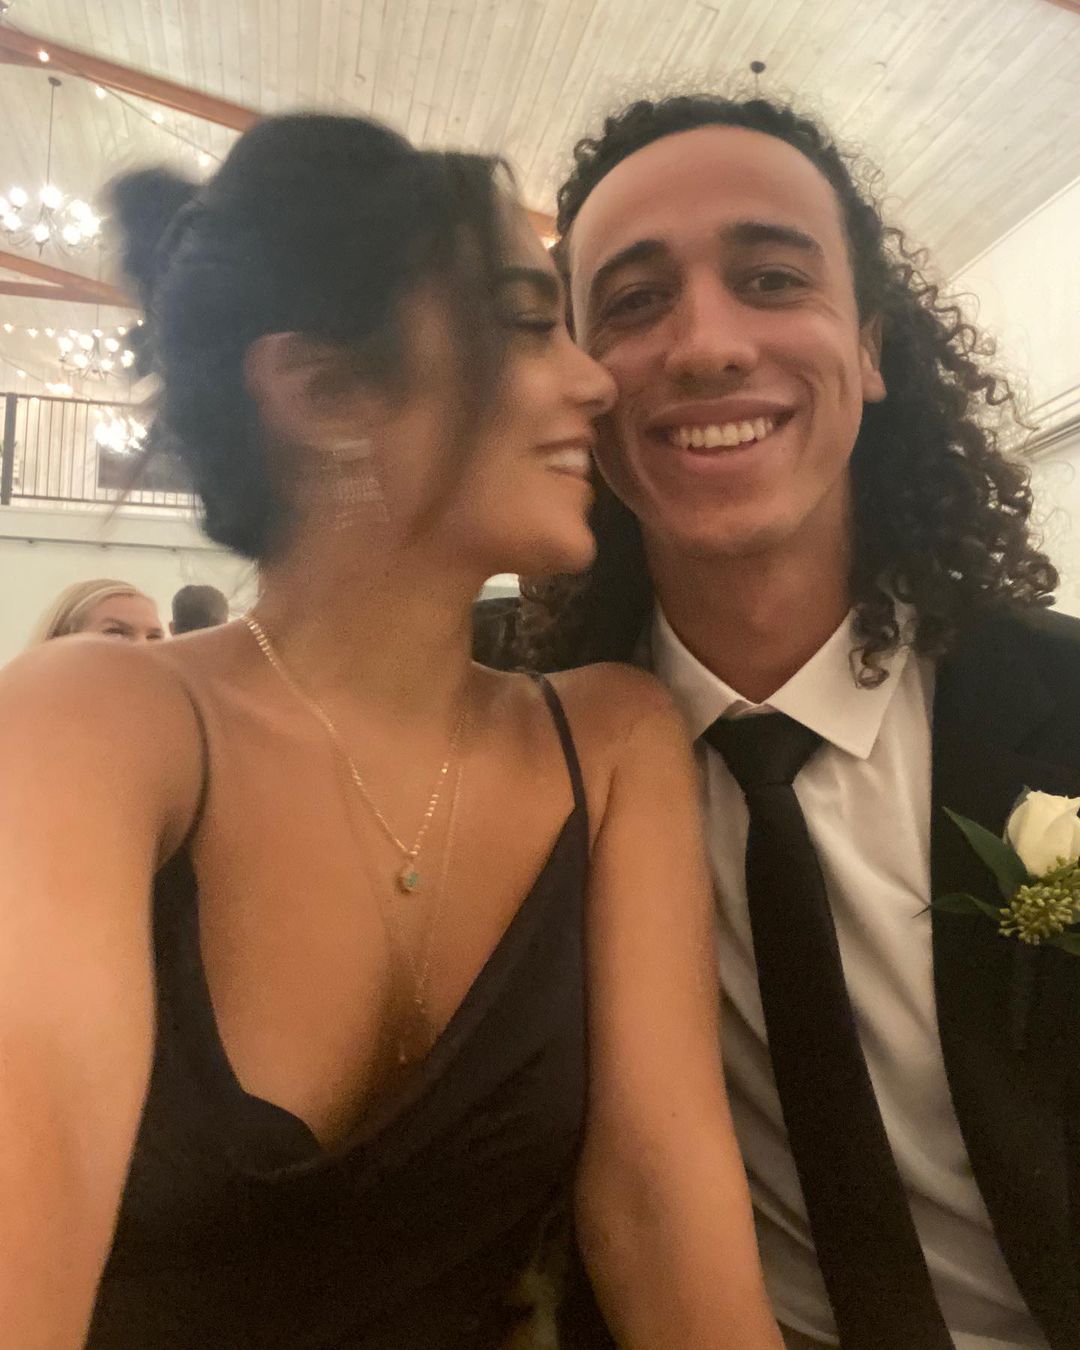 MLB Player Cole Tucker Opens Up About His Relationship with Vanessa Hudgens